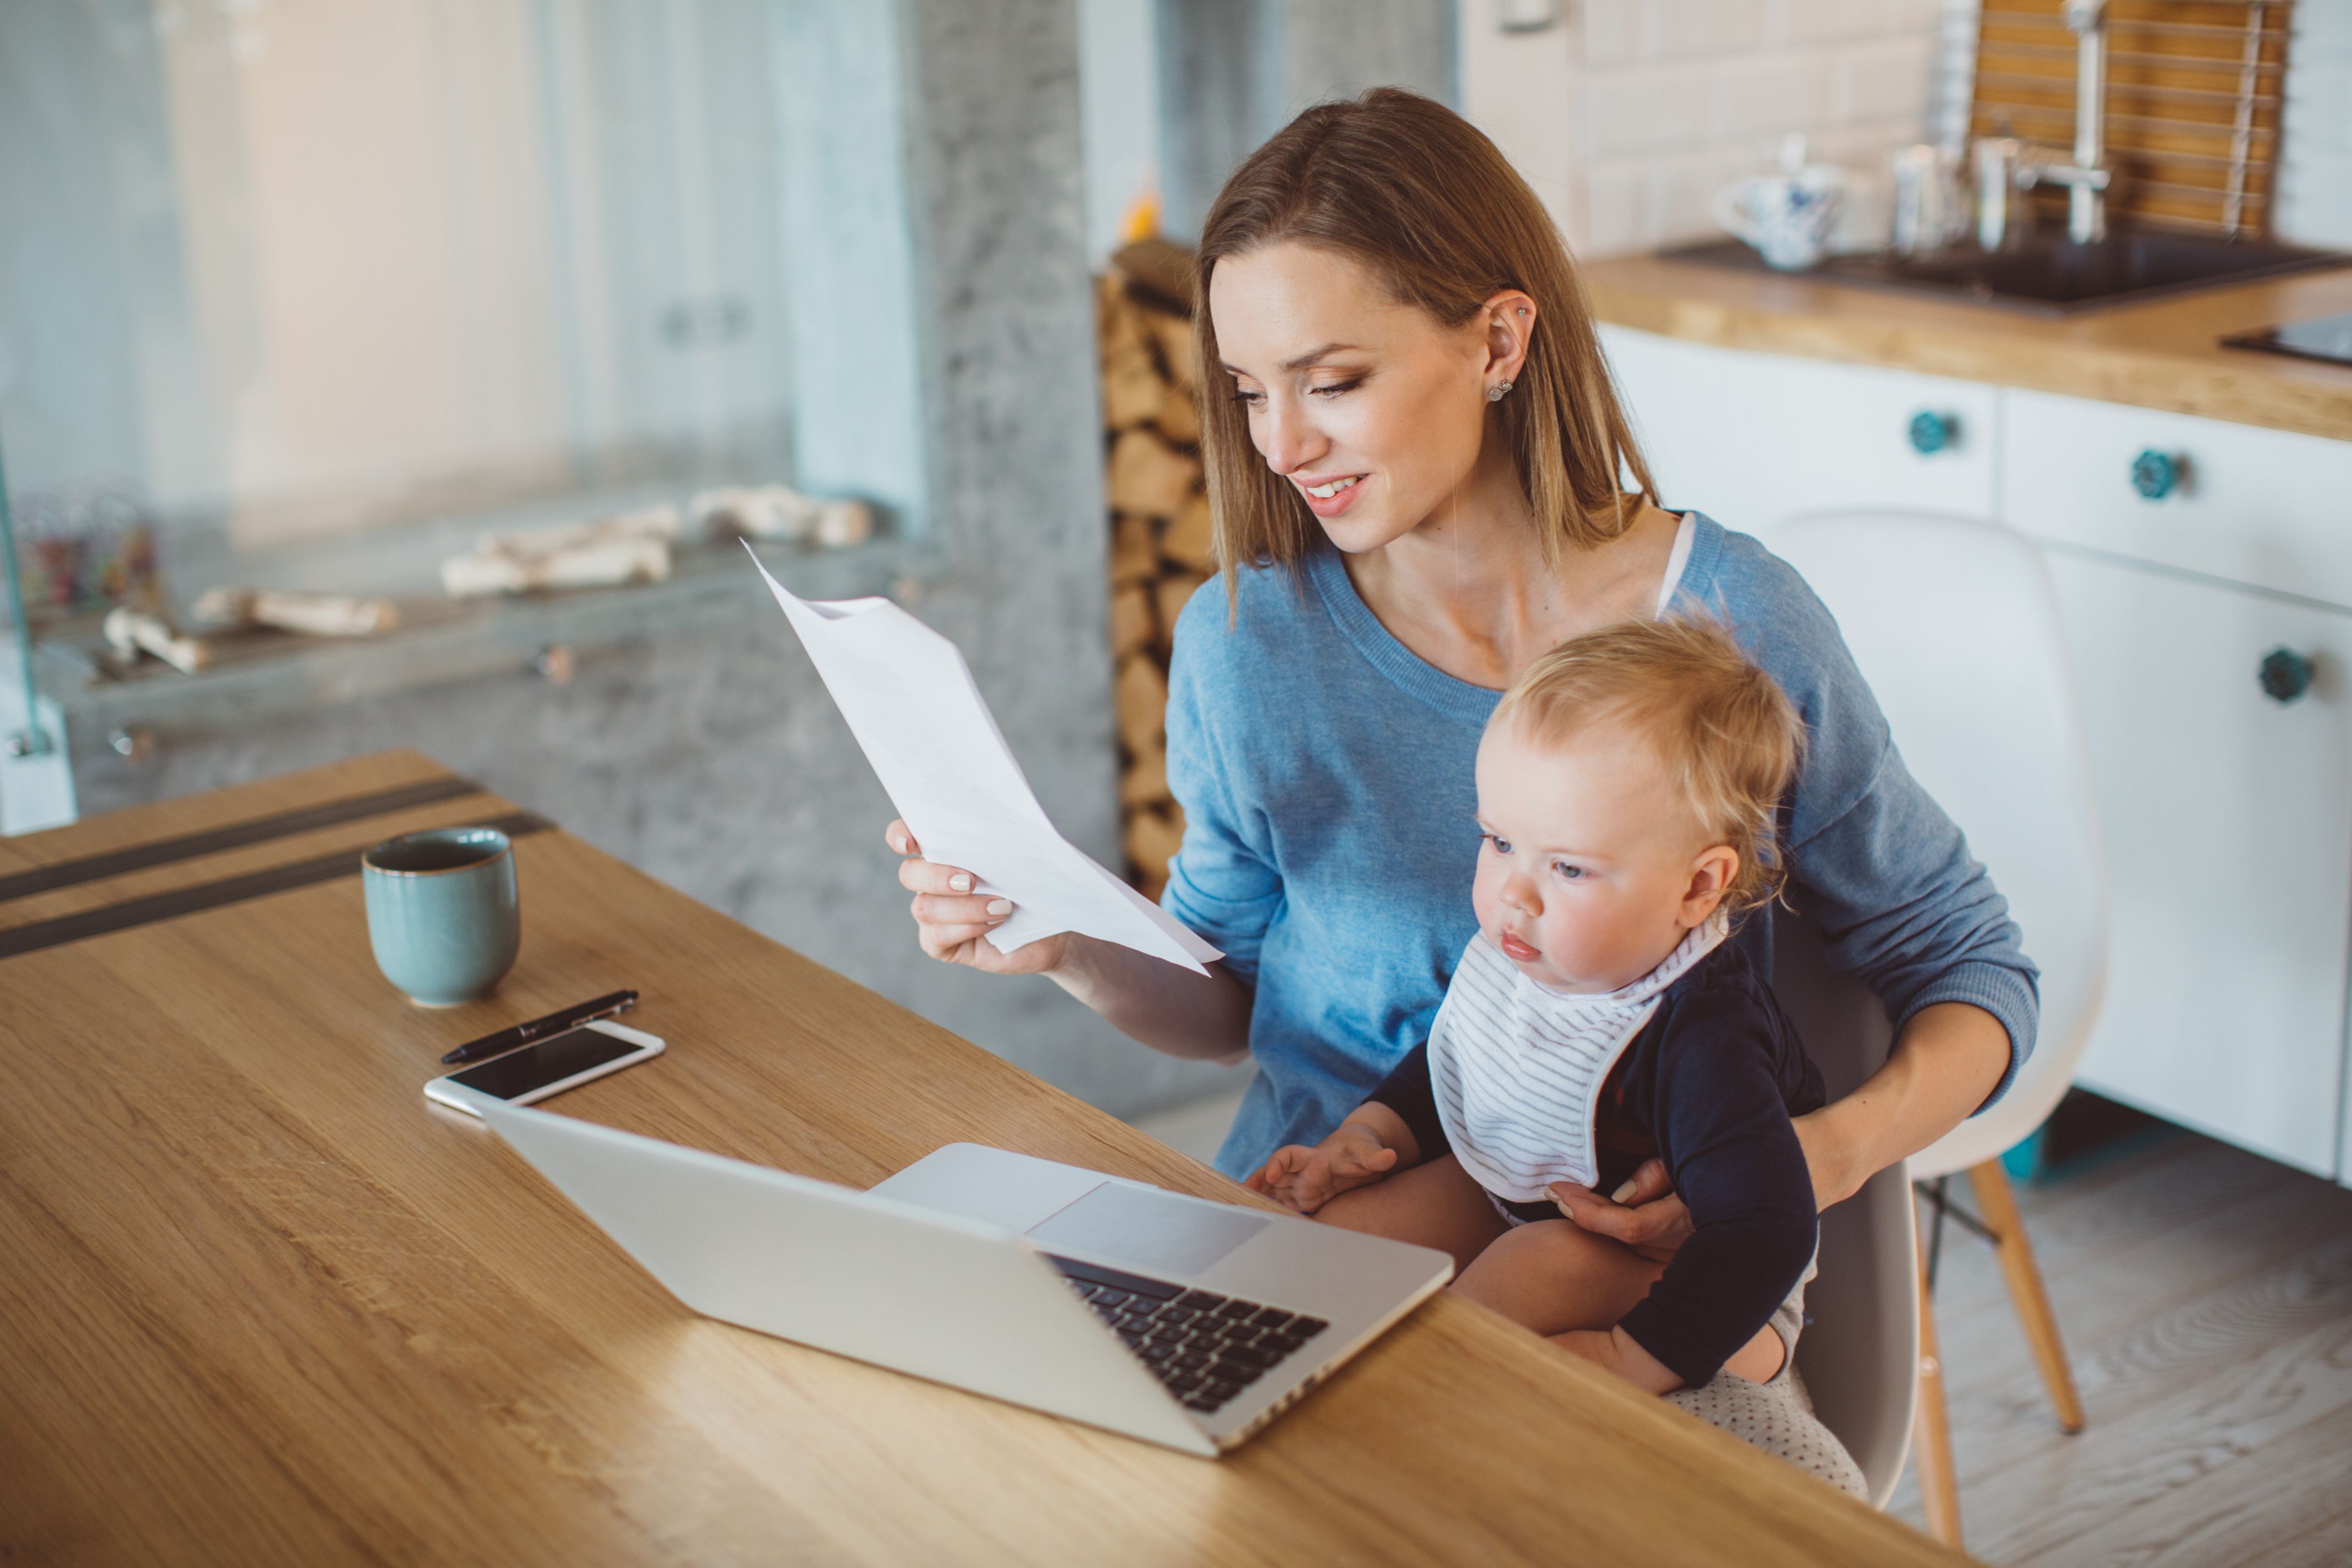 21 Best Stay at Home Mom Jobs - How Moms Can Make Money From Home